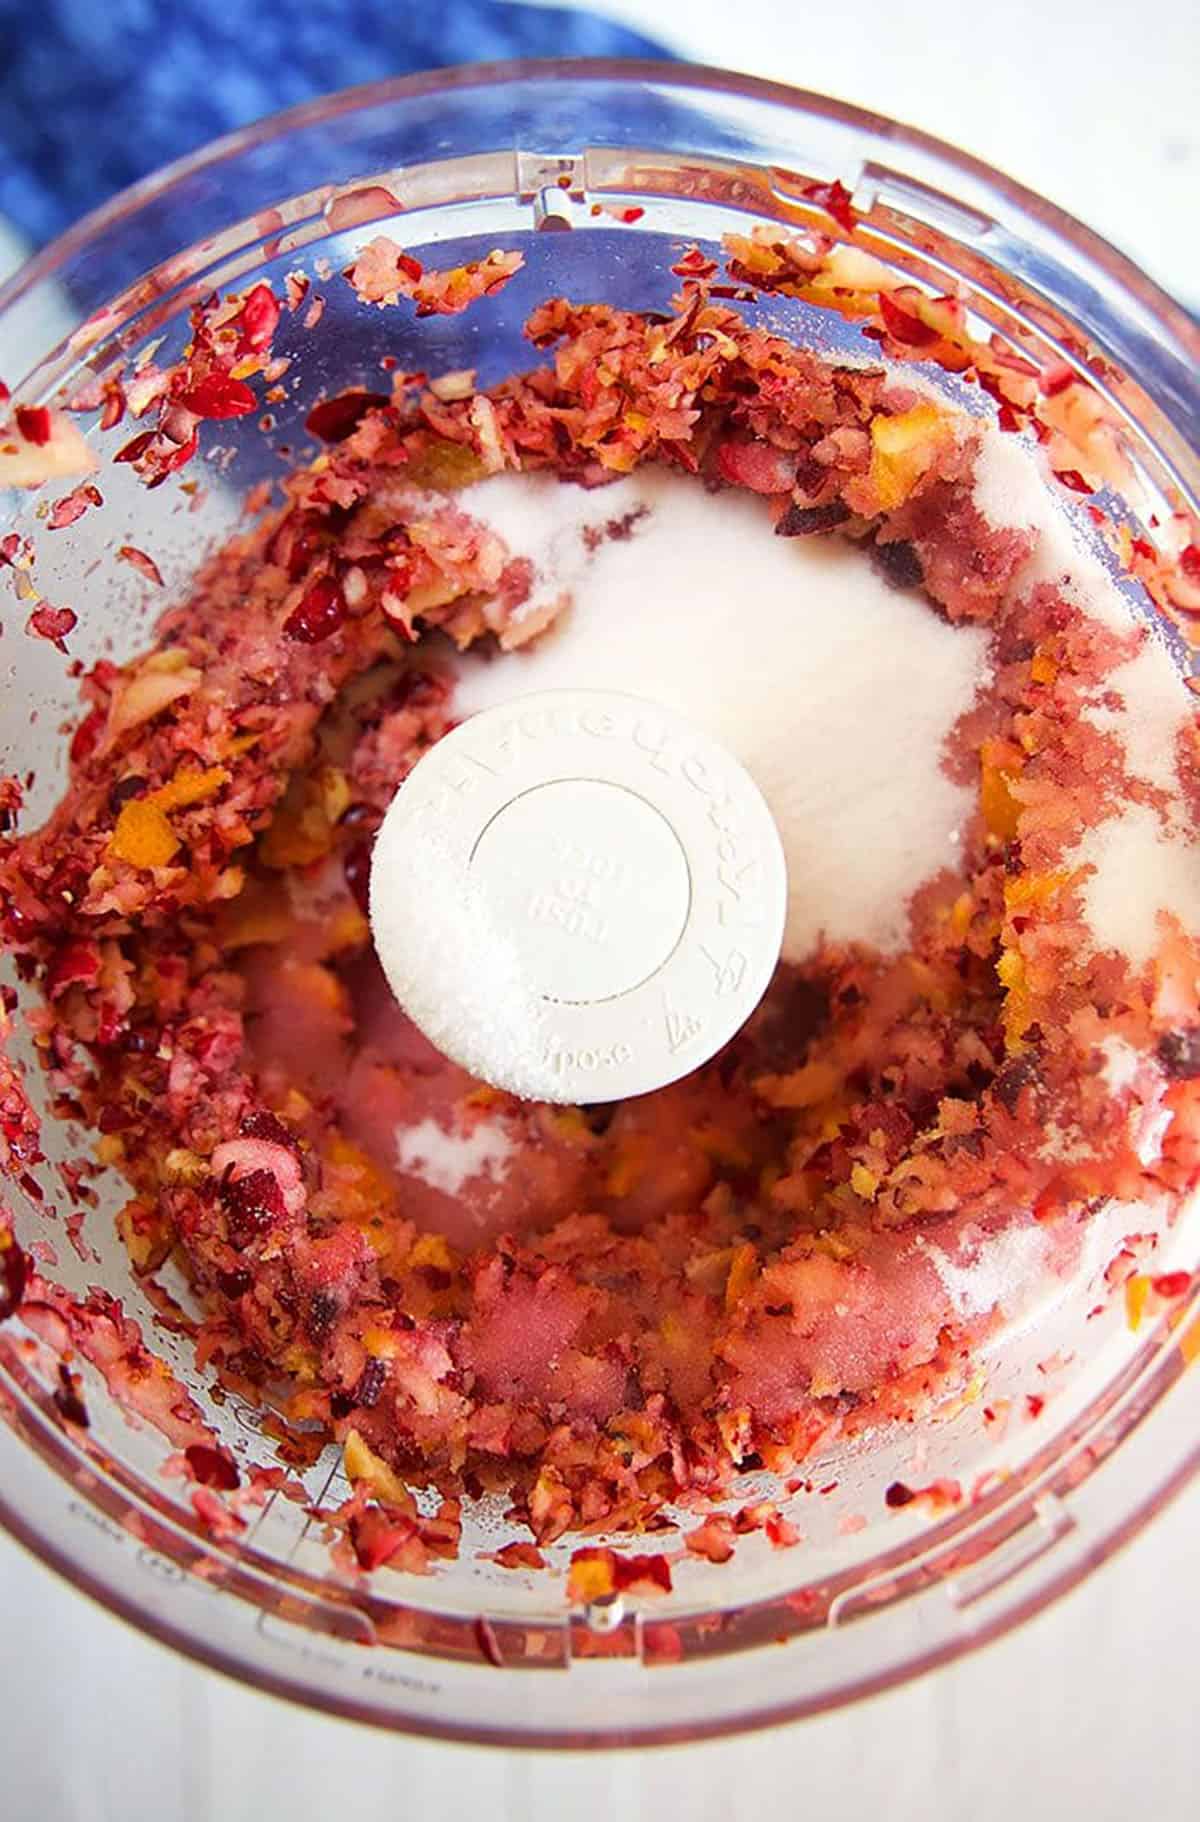 chopped ingredients for cranberry relish in the bowl of a food processor.